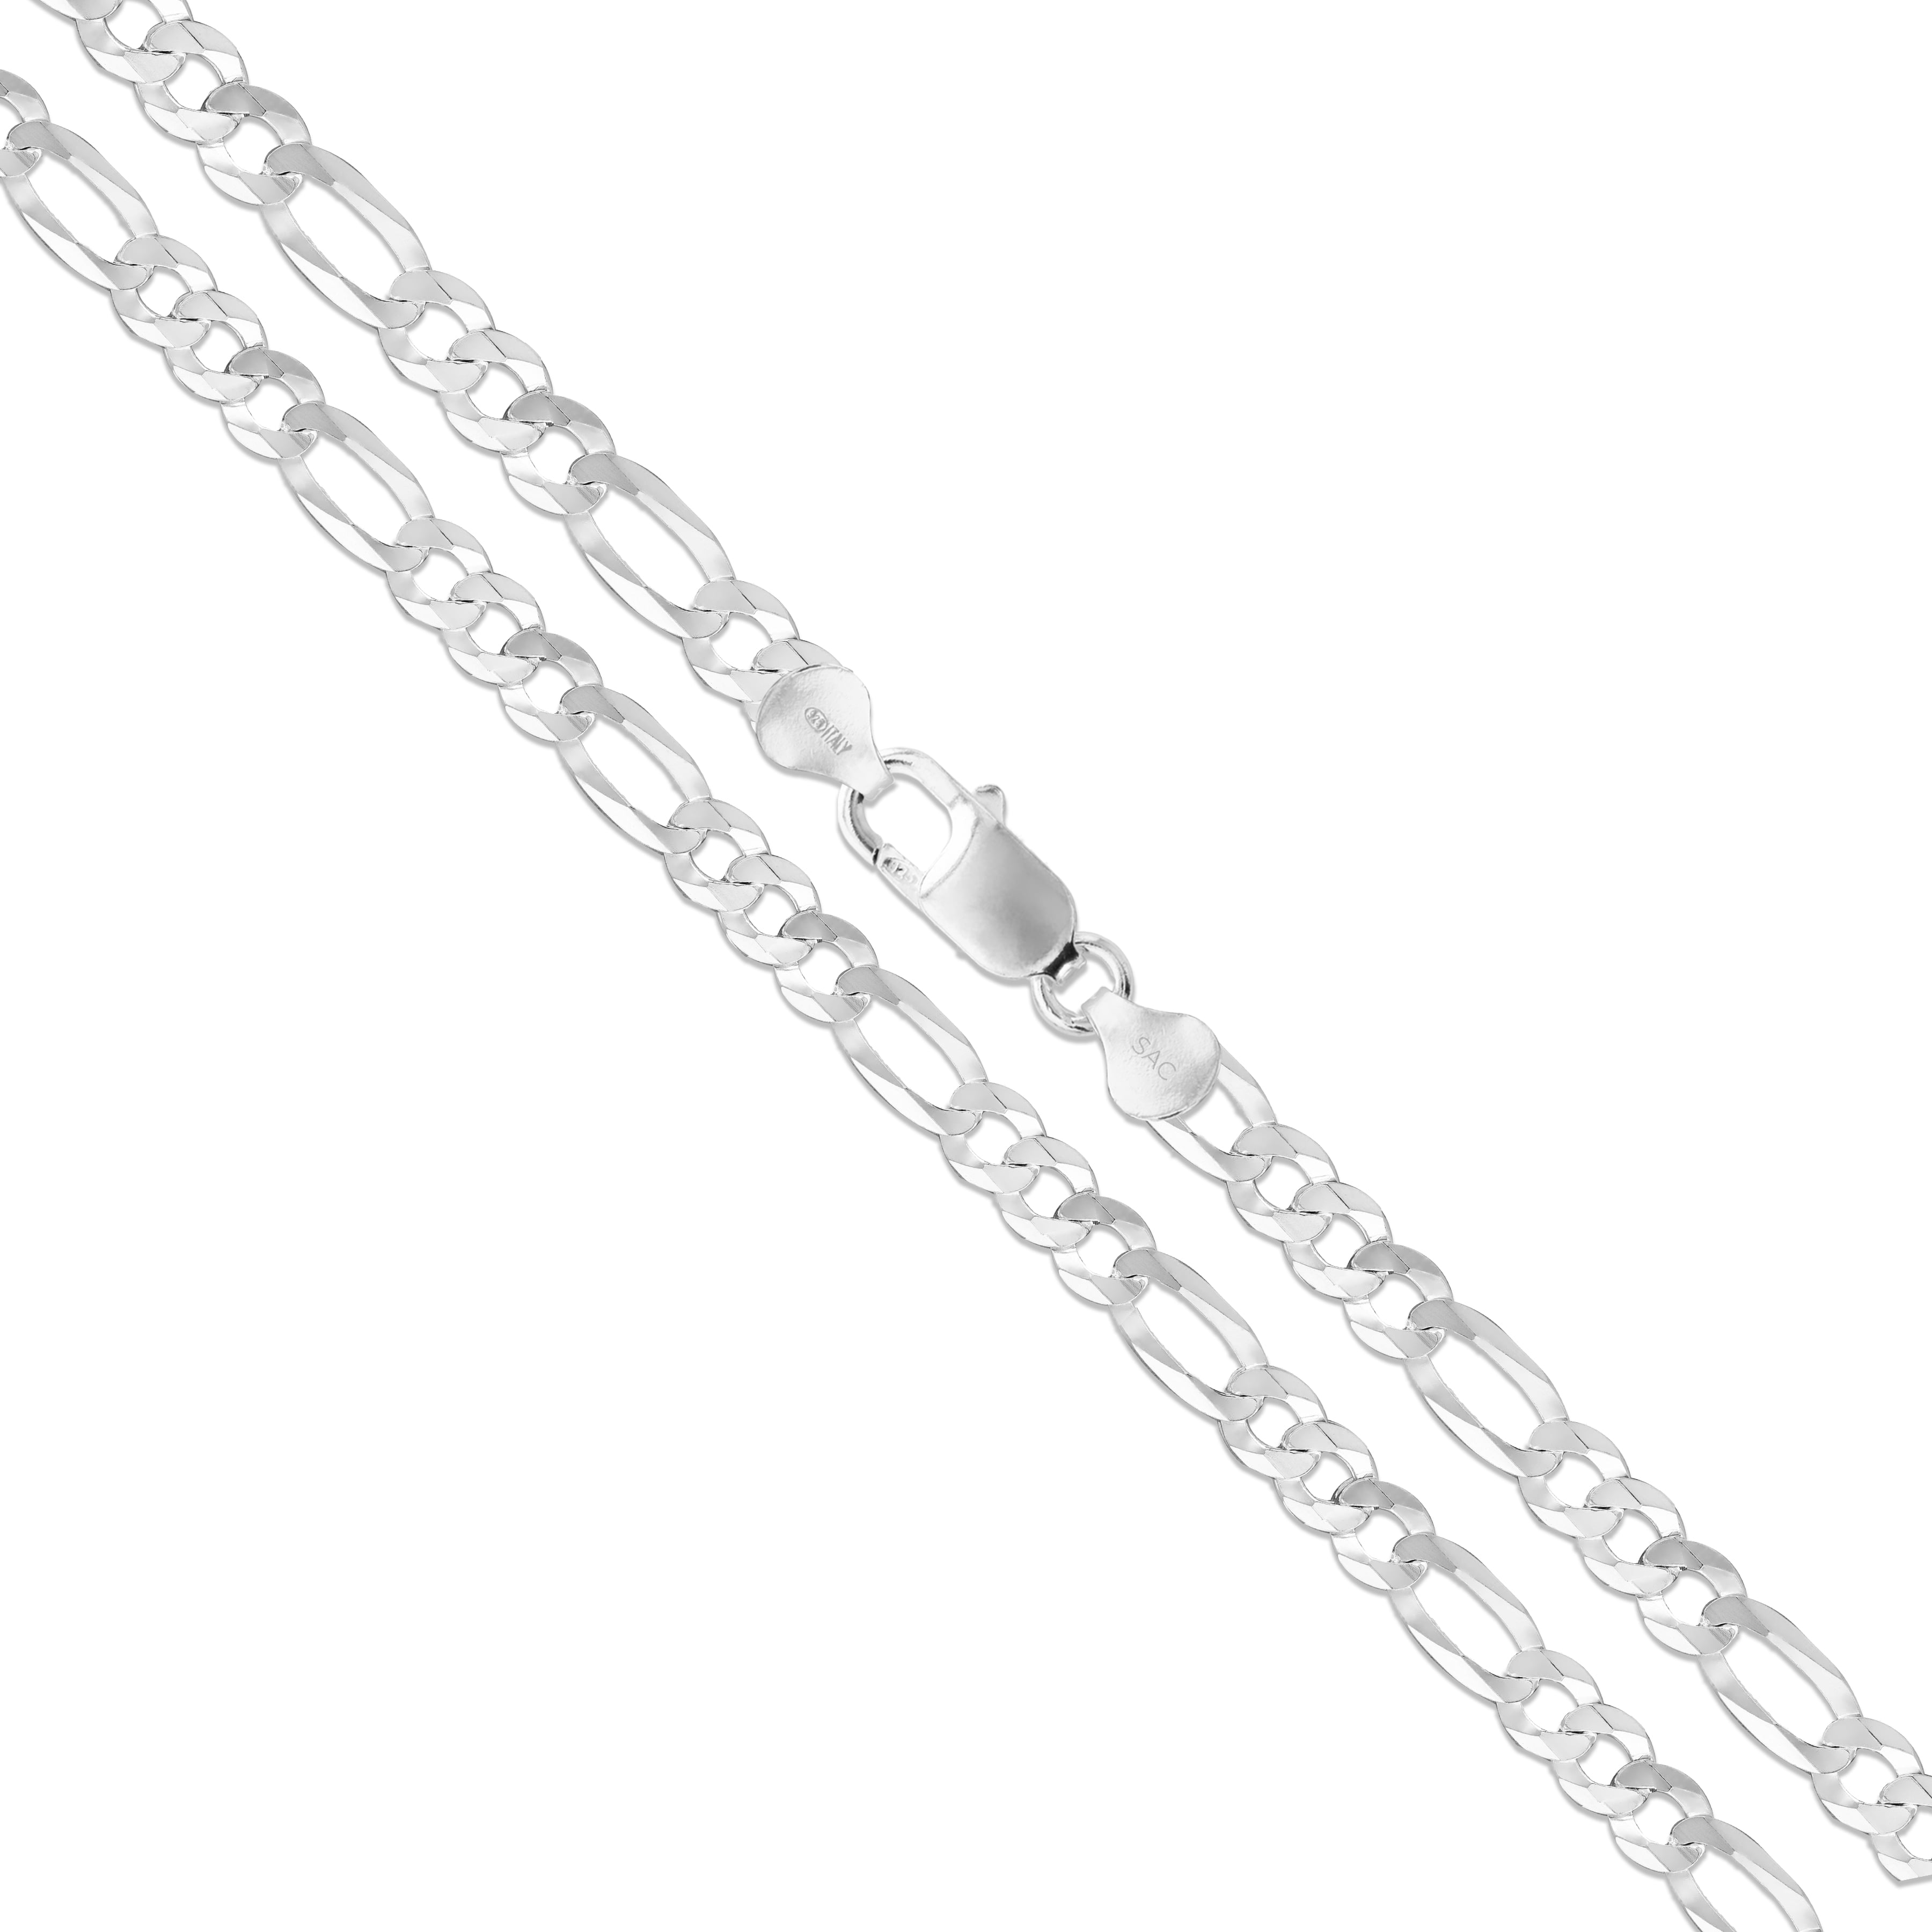 Real Sterling Silver Mens Boys Figaro Solid Chain Bracelet or Necklace 925 Italy 